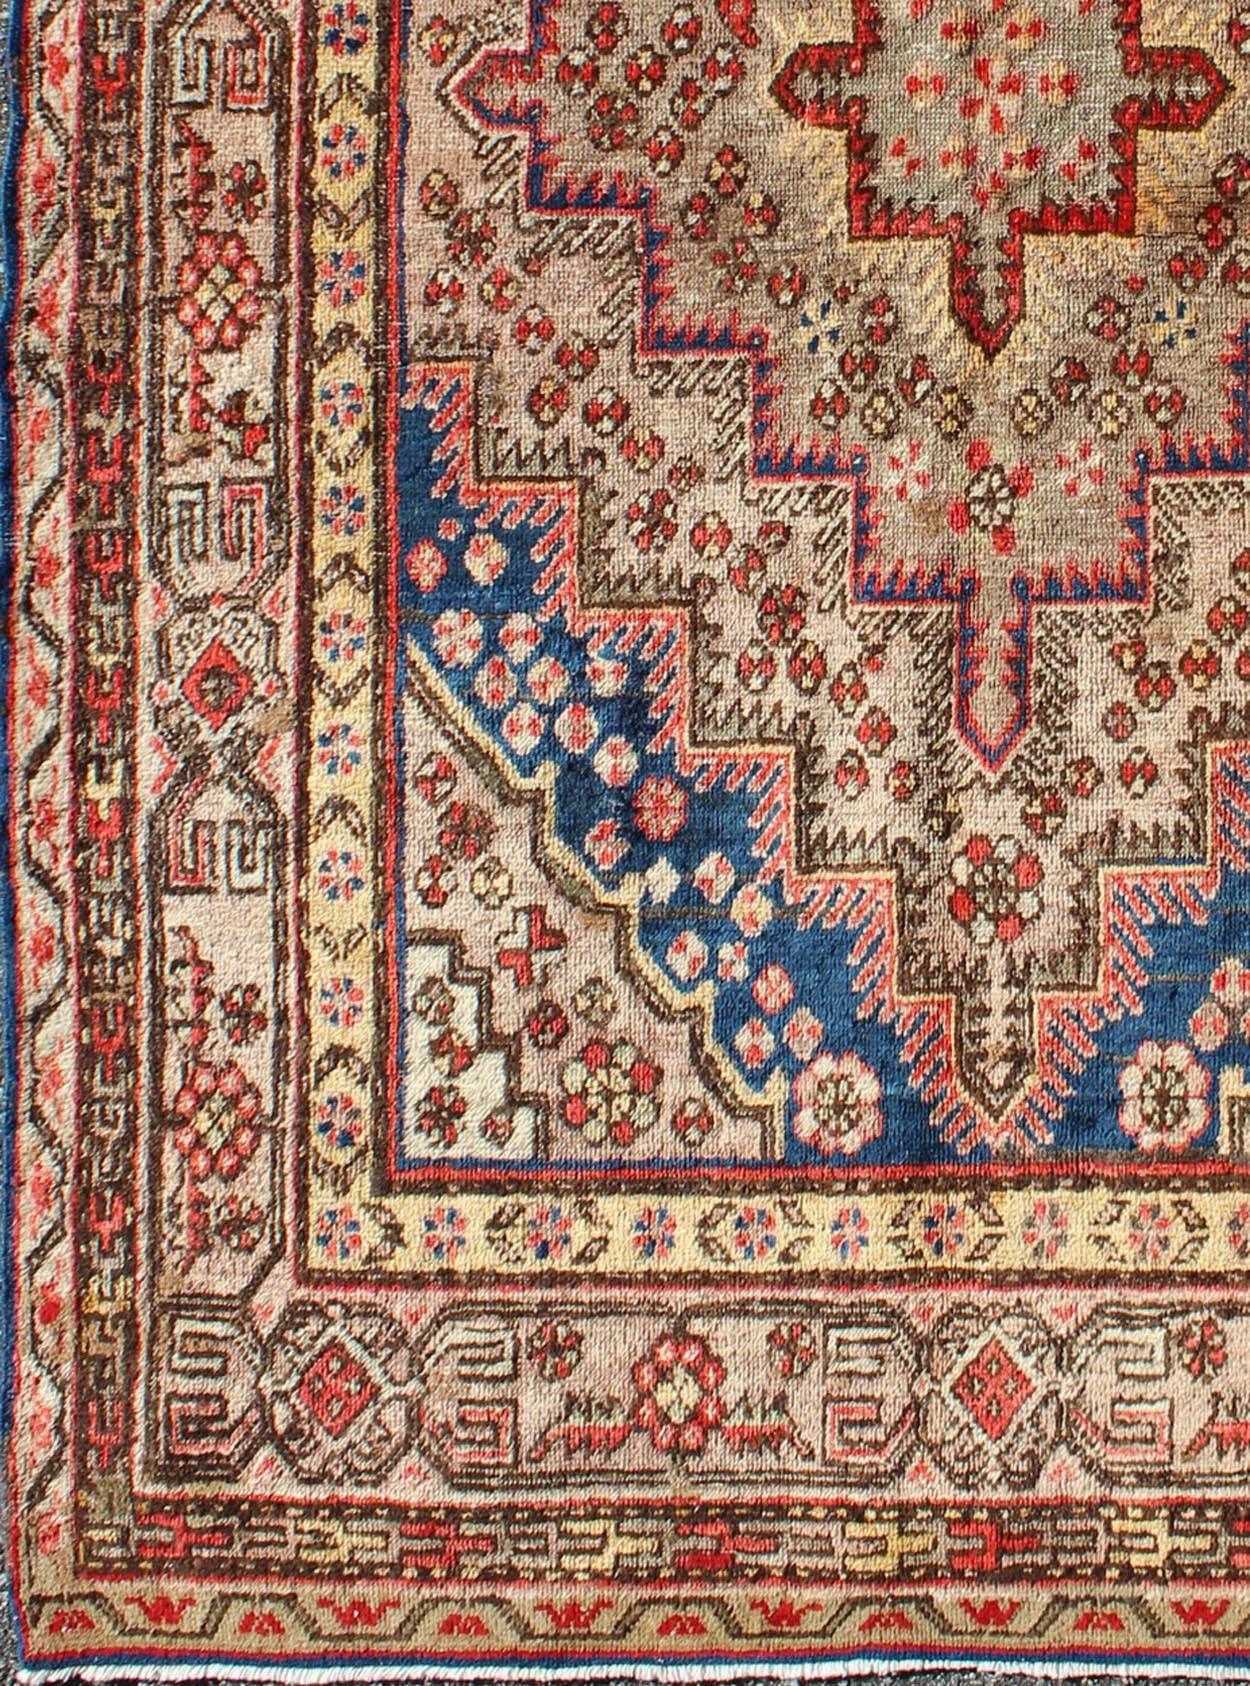 Multi colored background antique Khotan rug with layered medallions, rug mp-1301-434, country of origin / type: East Turkestan / Khotan, circa 1920

Measures: 4'8 x 6'6.

This exquisite antique carpet created in Khotan (circa 1920) features an